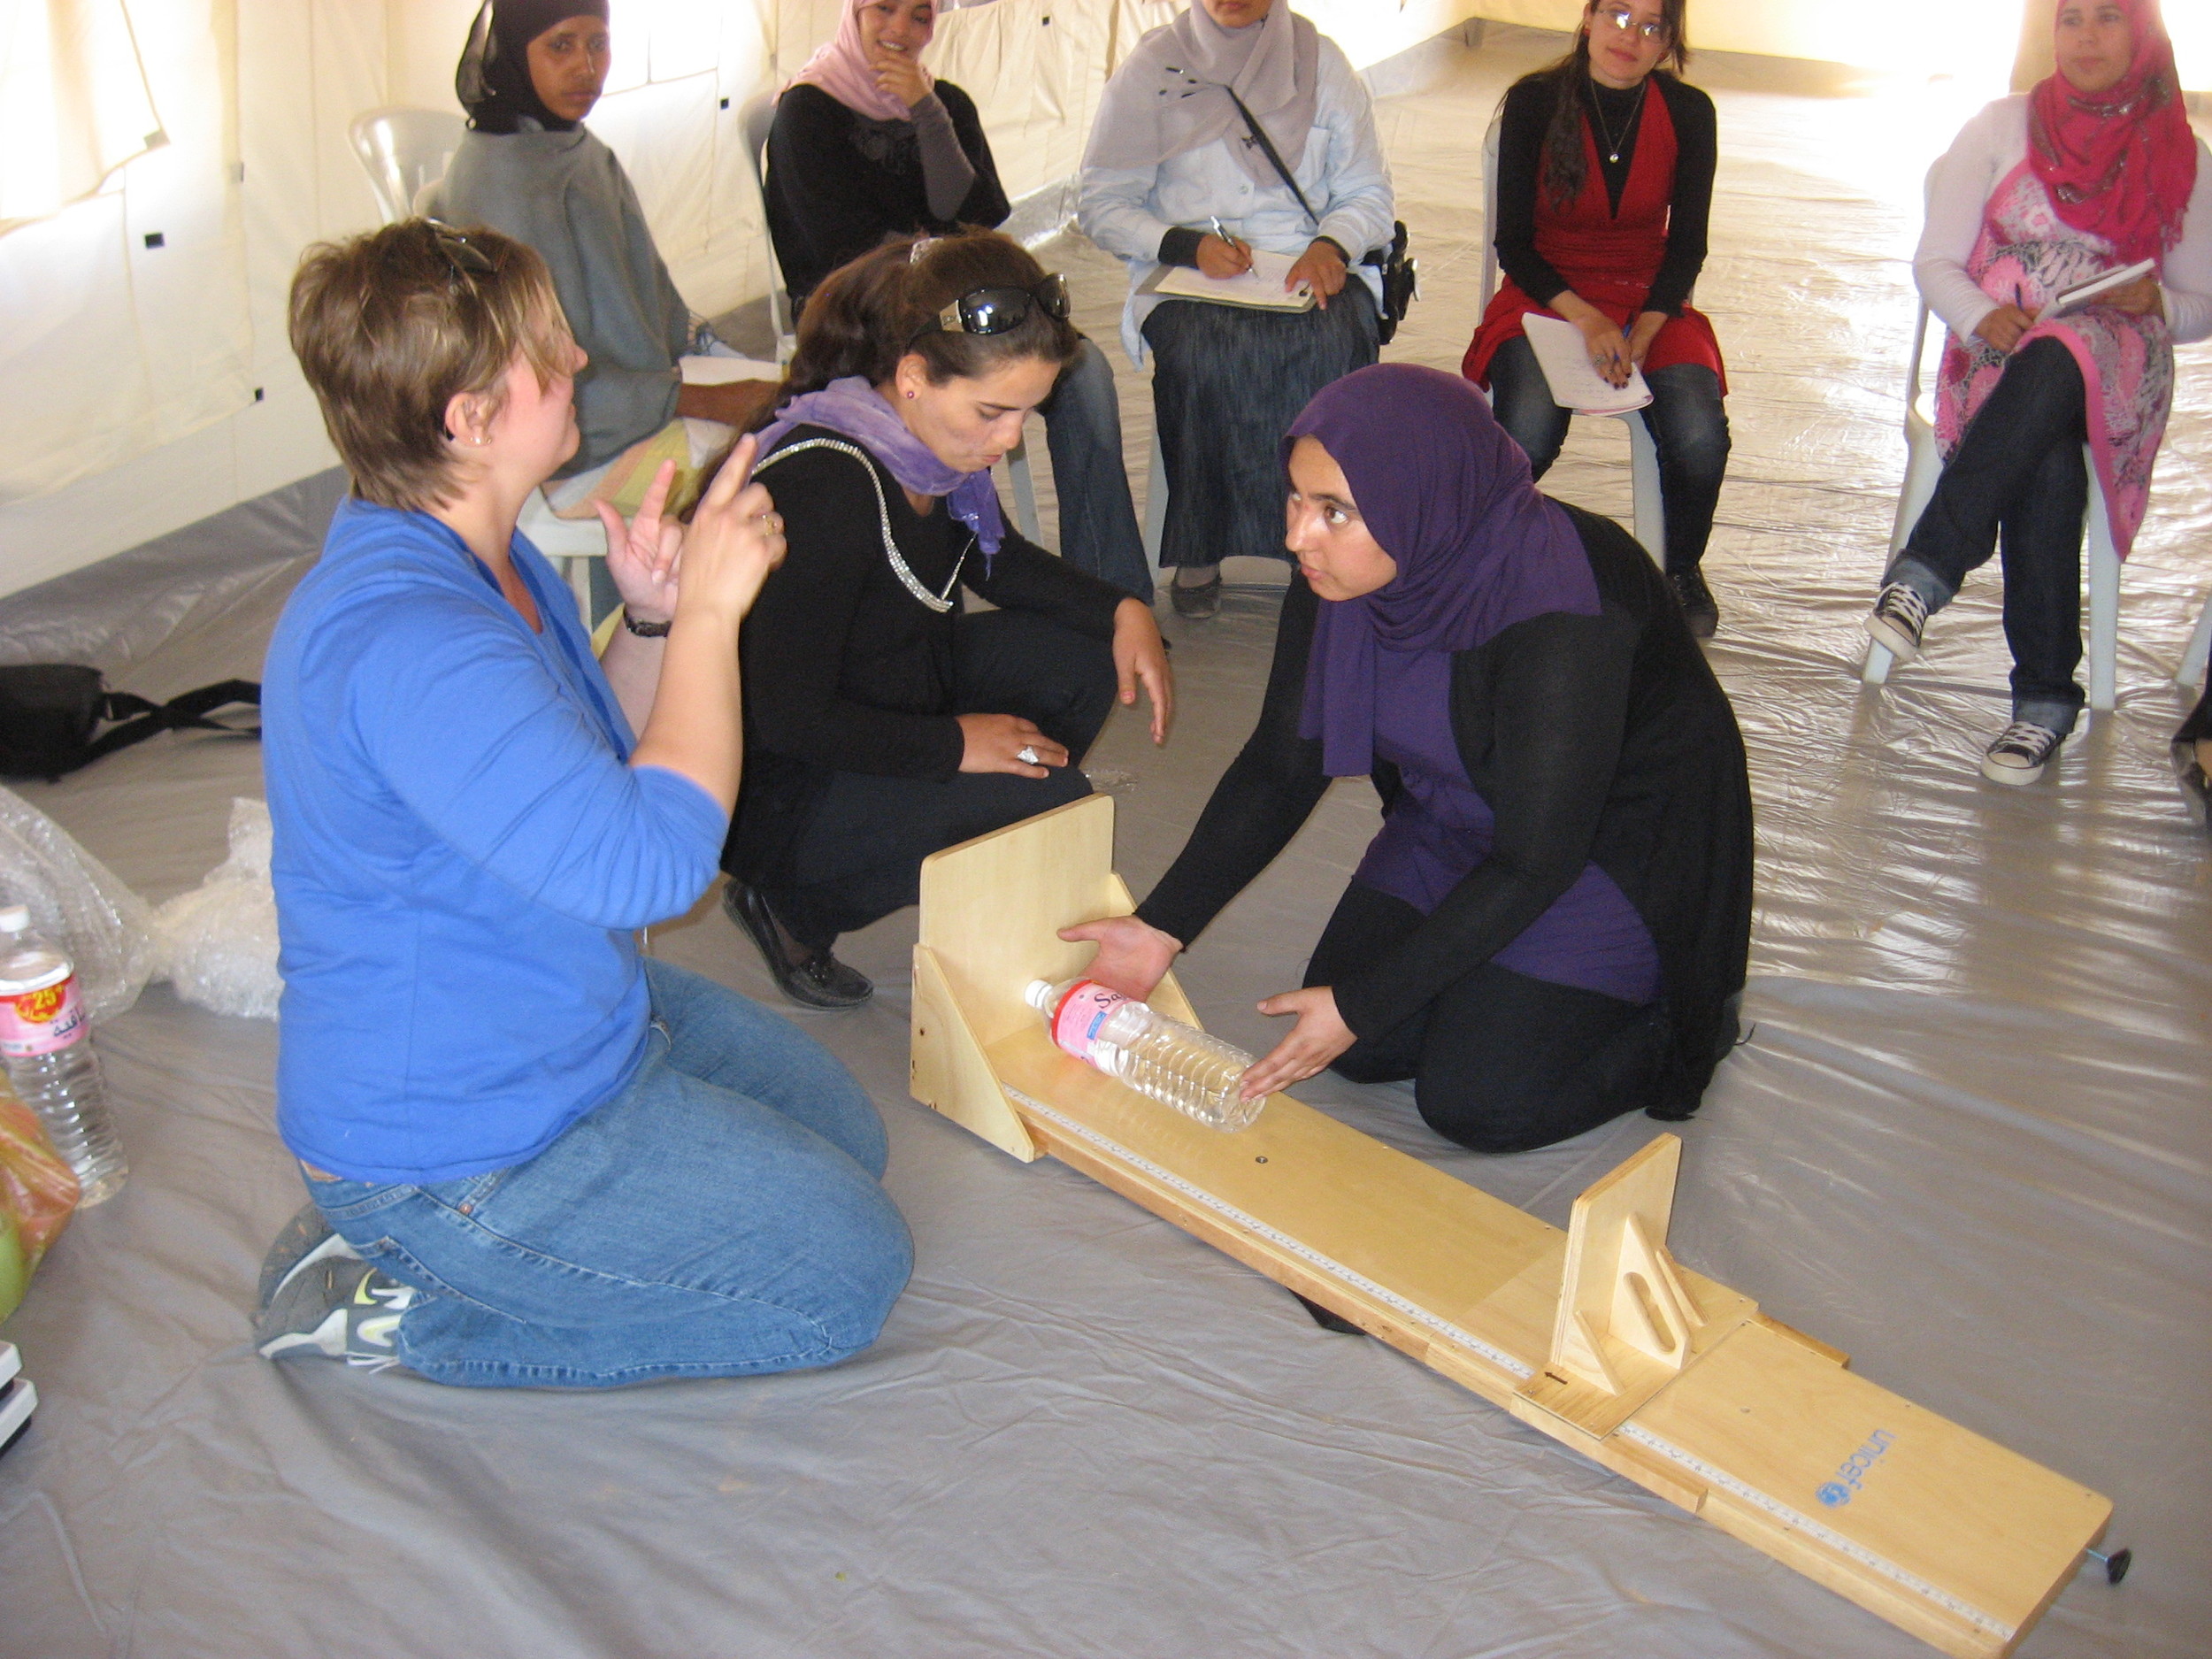 Training staff on how to take a child's height using a water bottle at a refugee camp on the Tunisian border.